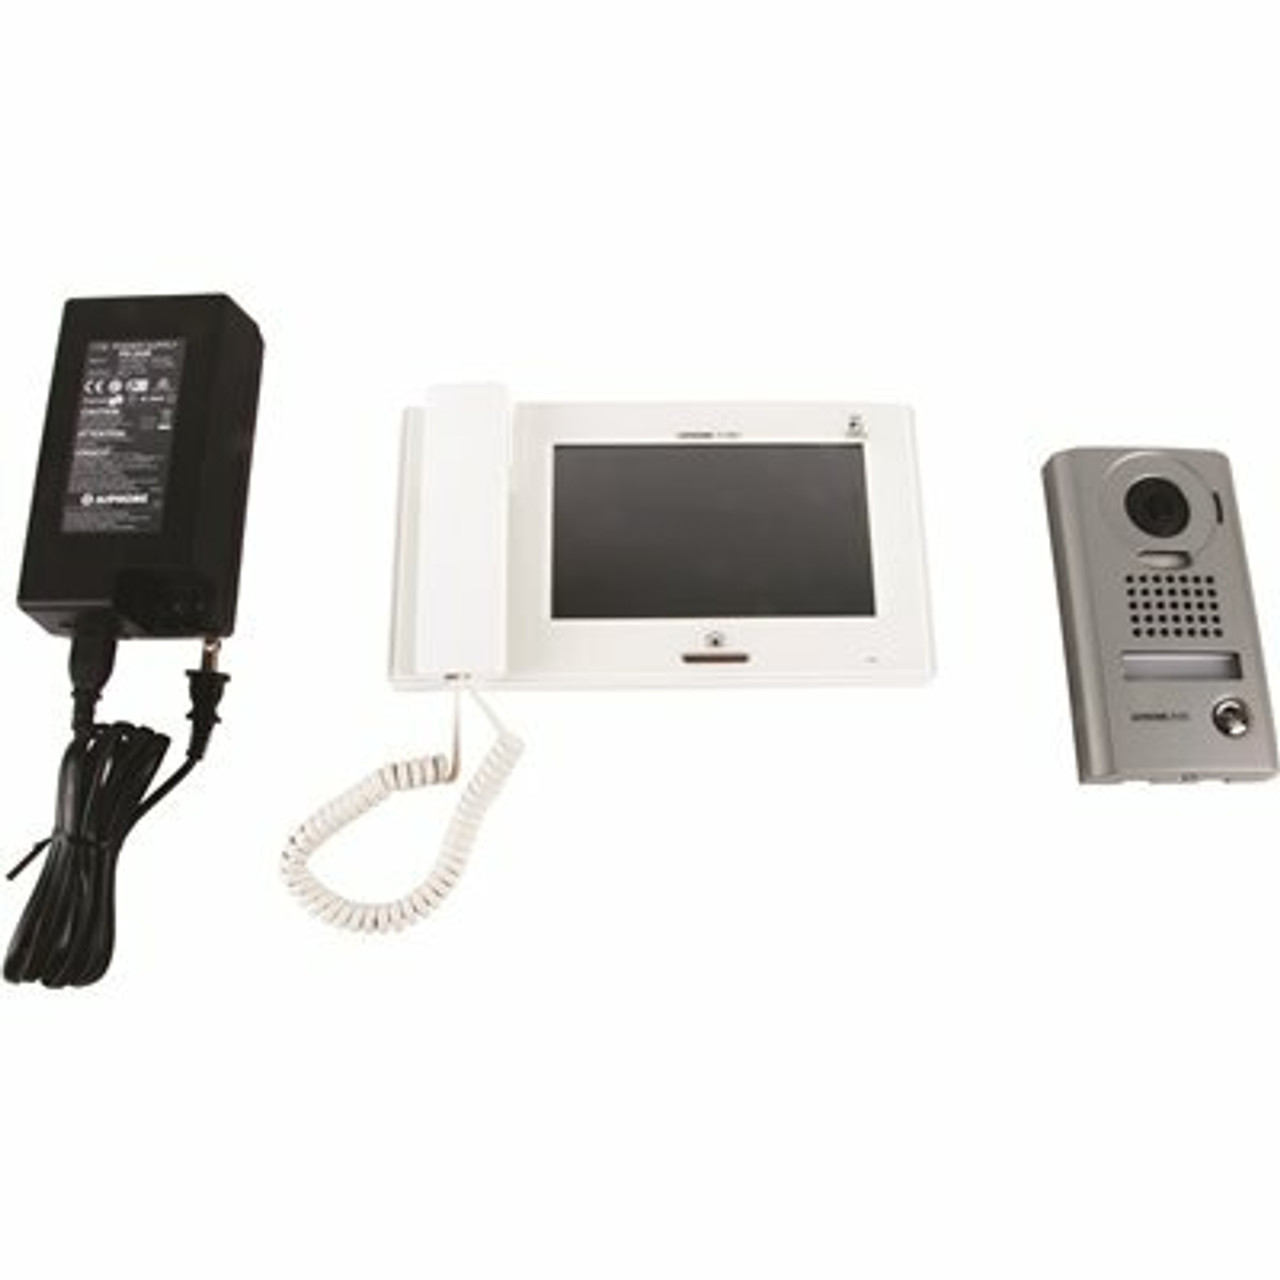 Aiphone Jp Series Surface Mount 1-Channel Audio And Video Intercom With Call Storage And Picture Memory, White - Gray - 312933470